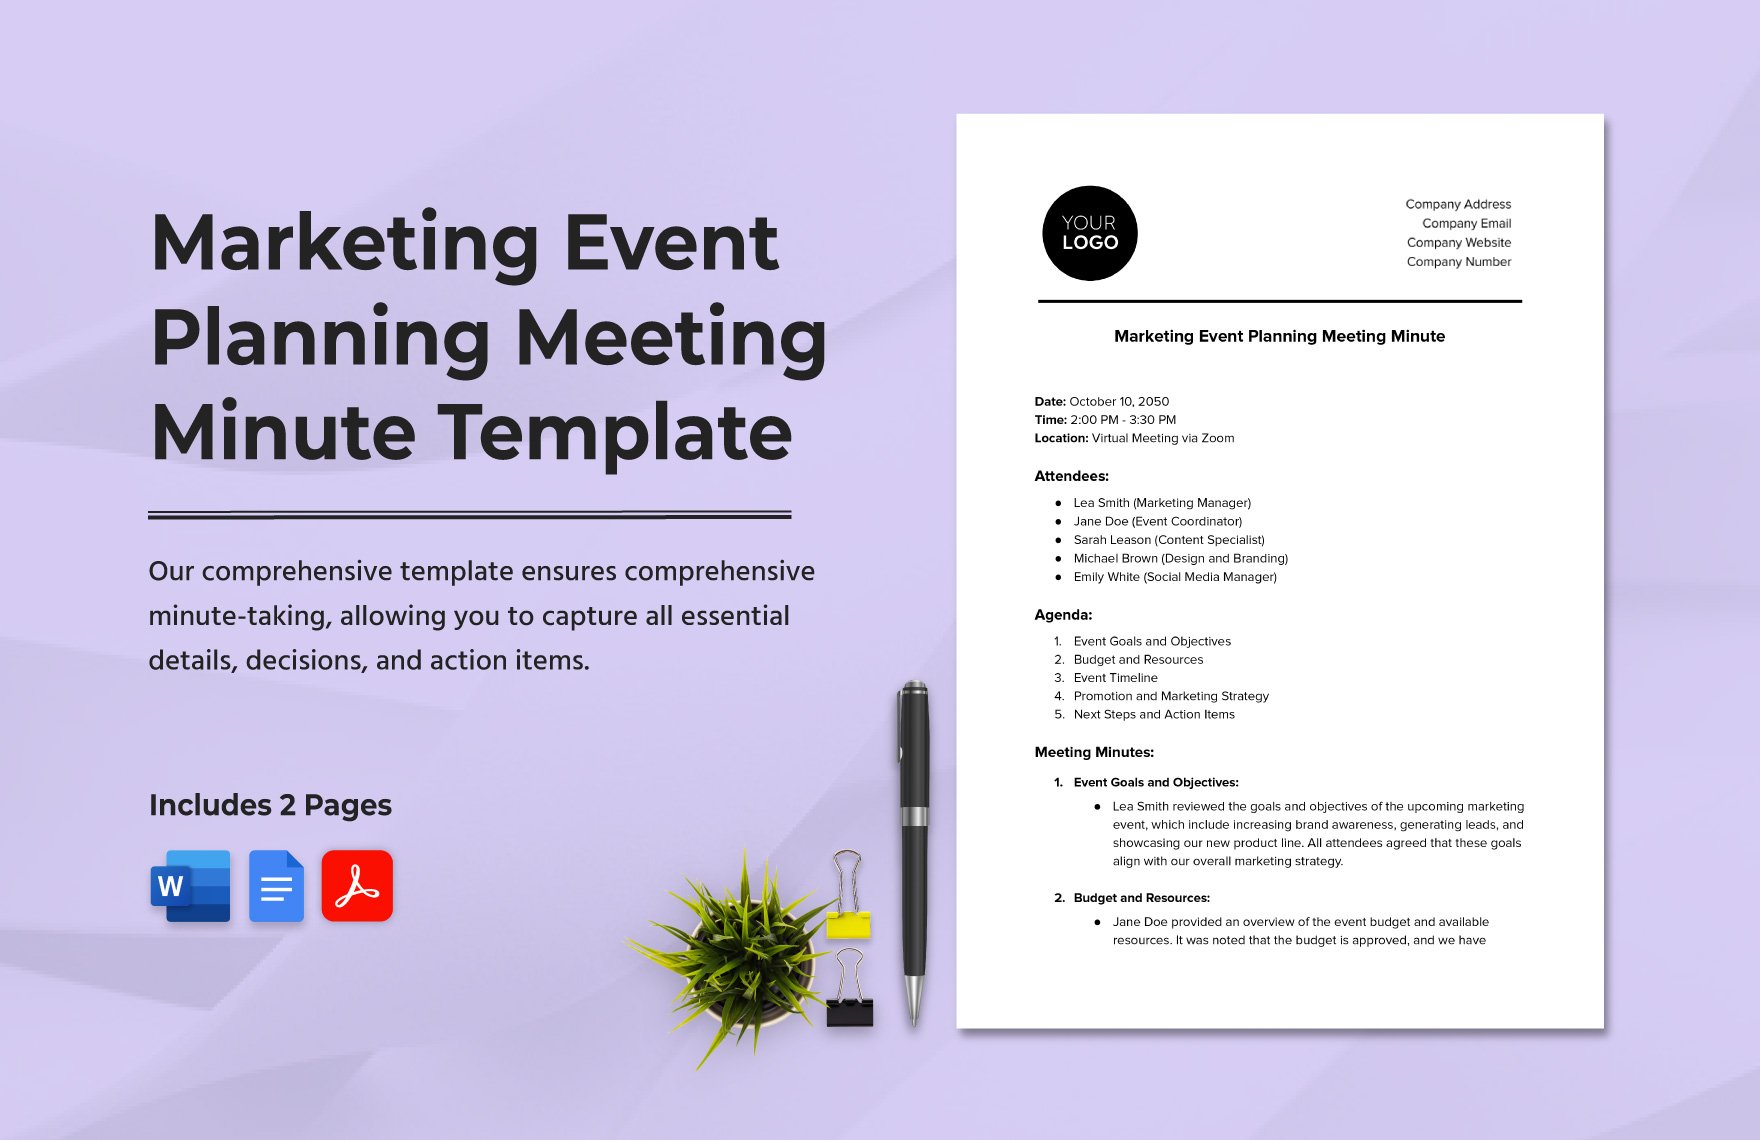 Marketing Event Planning Meeting Minute Template  in Word, Google Docs, PDF